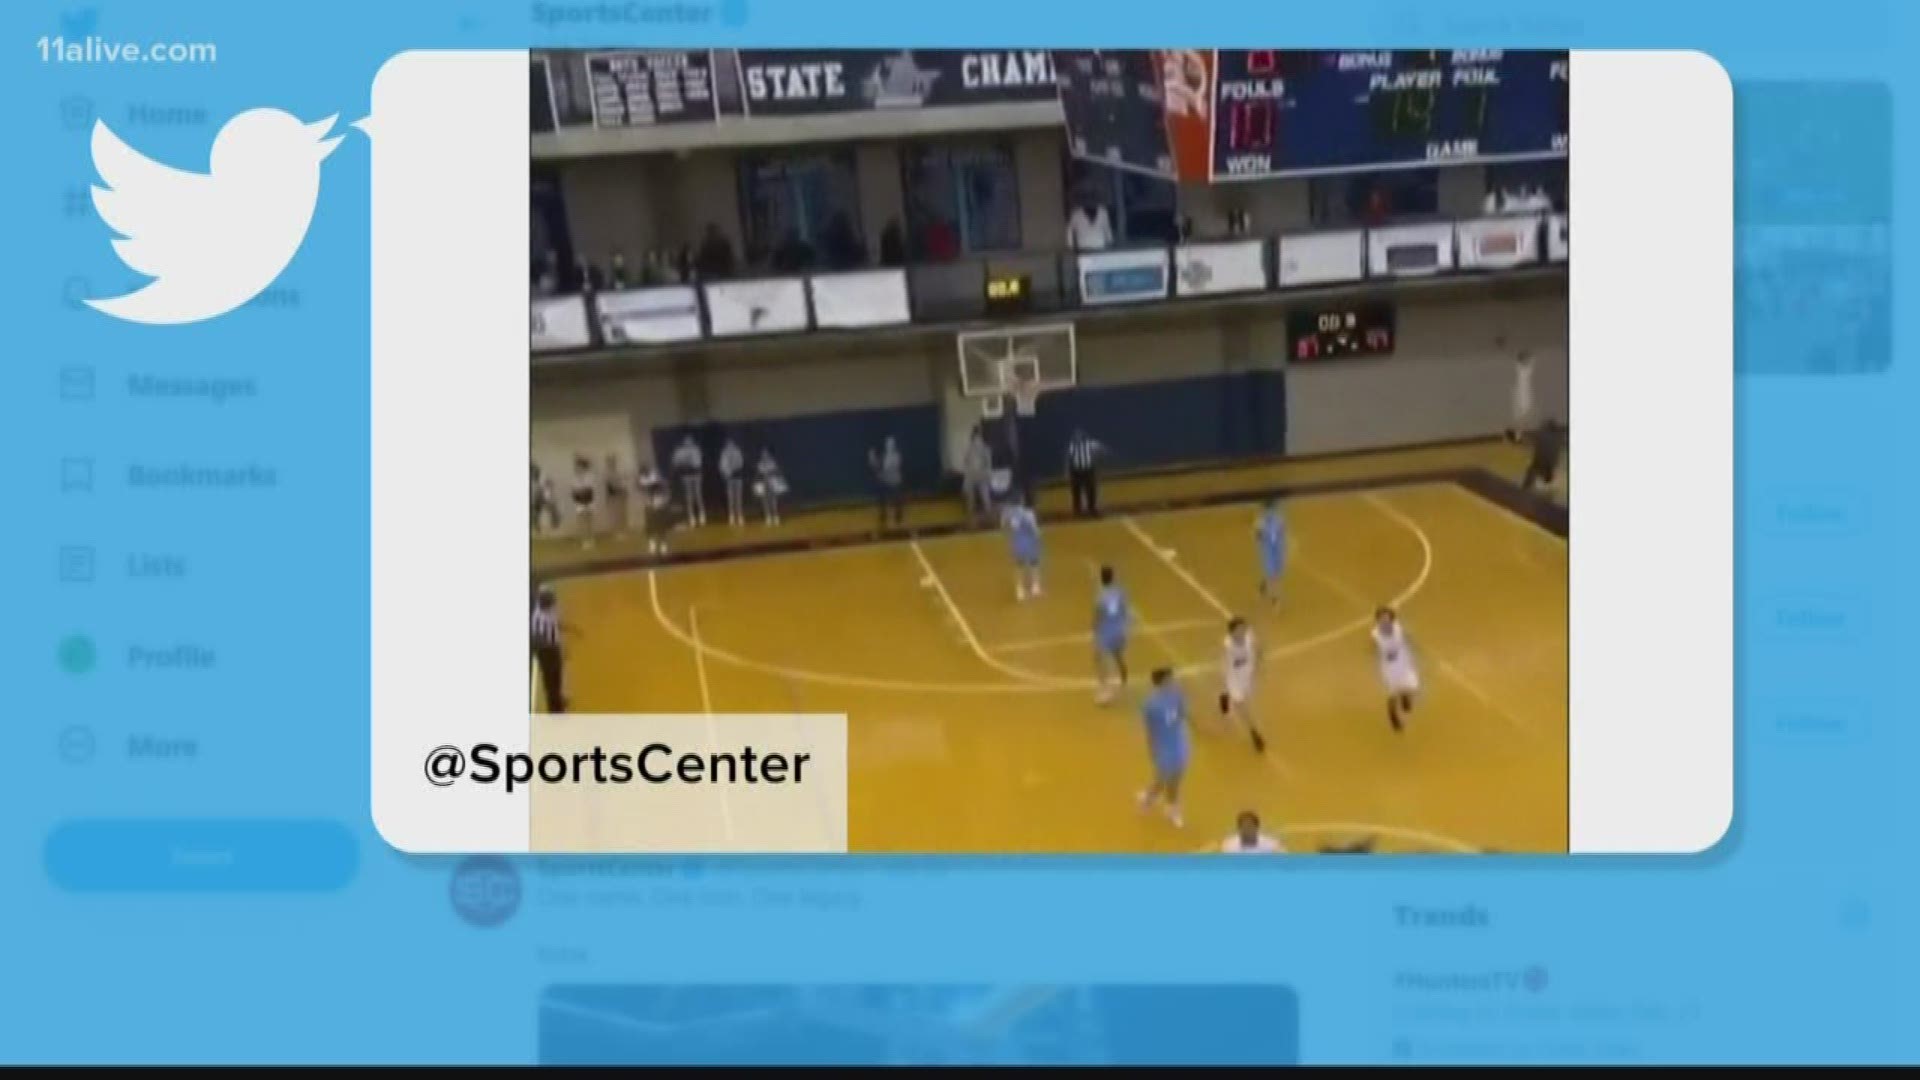 The video was viewed nearly 5 million times on SportsCenter